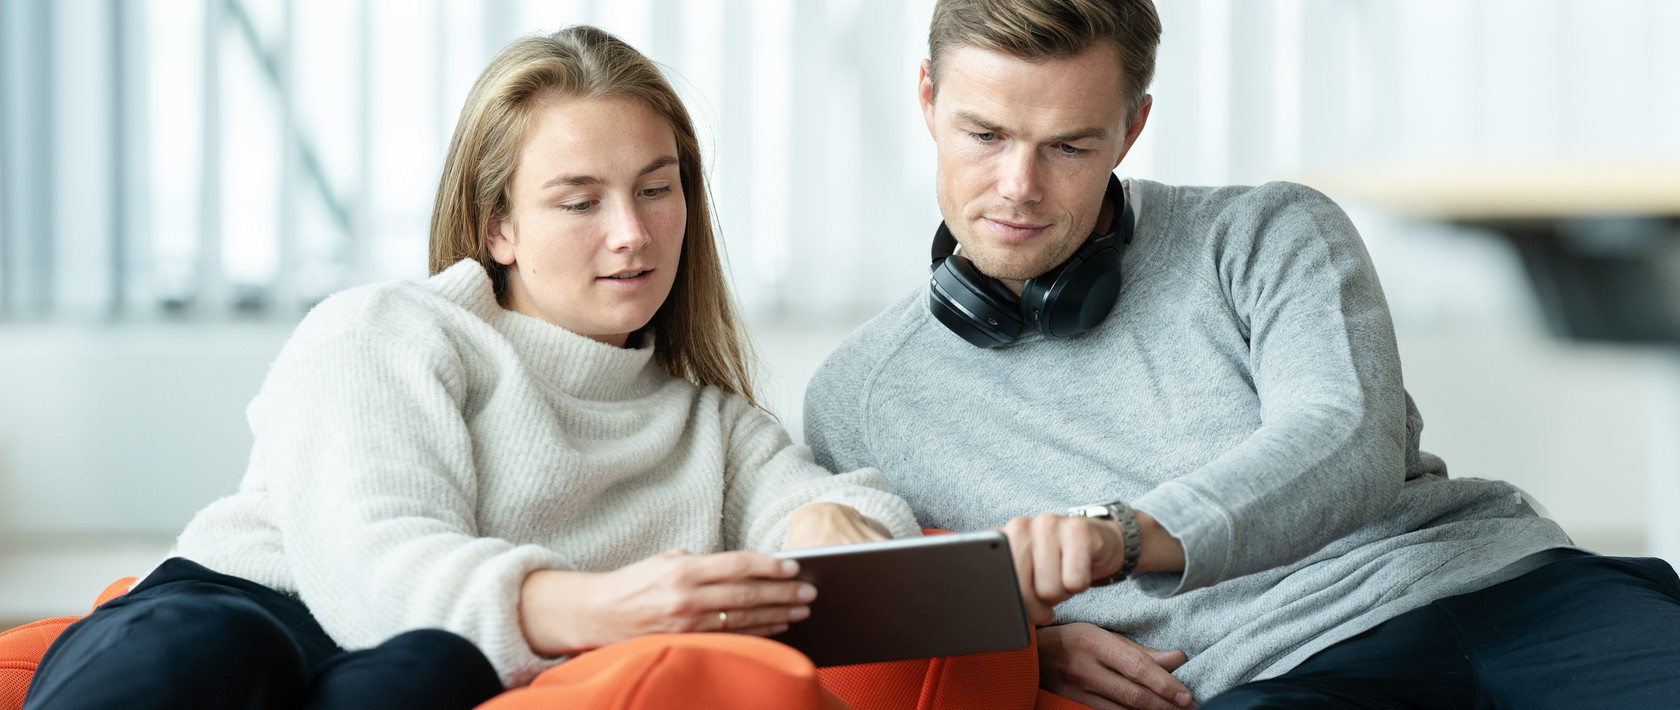 Woman in white sweater and man in grey sweater sitting in lounge chairs, leaning towards each other and looking at a tablet screen